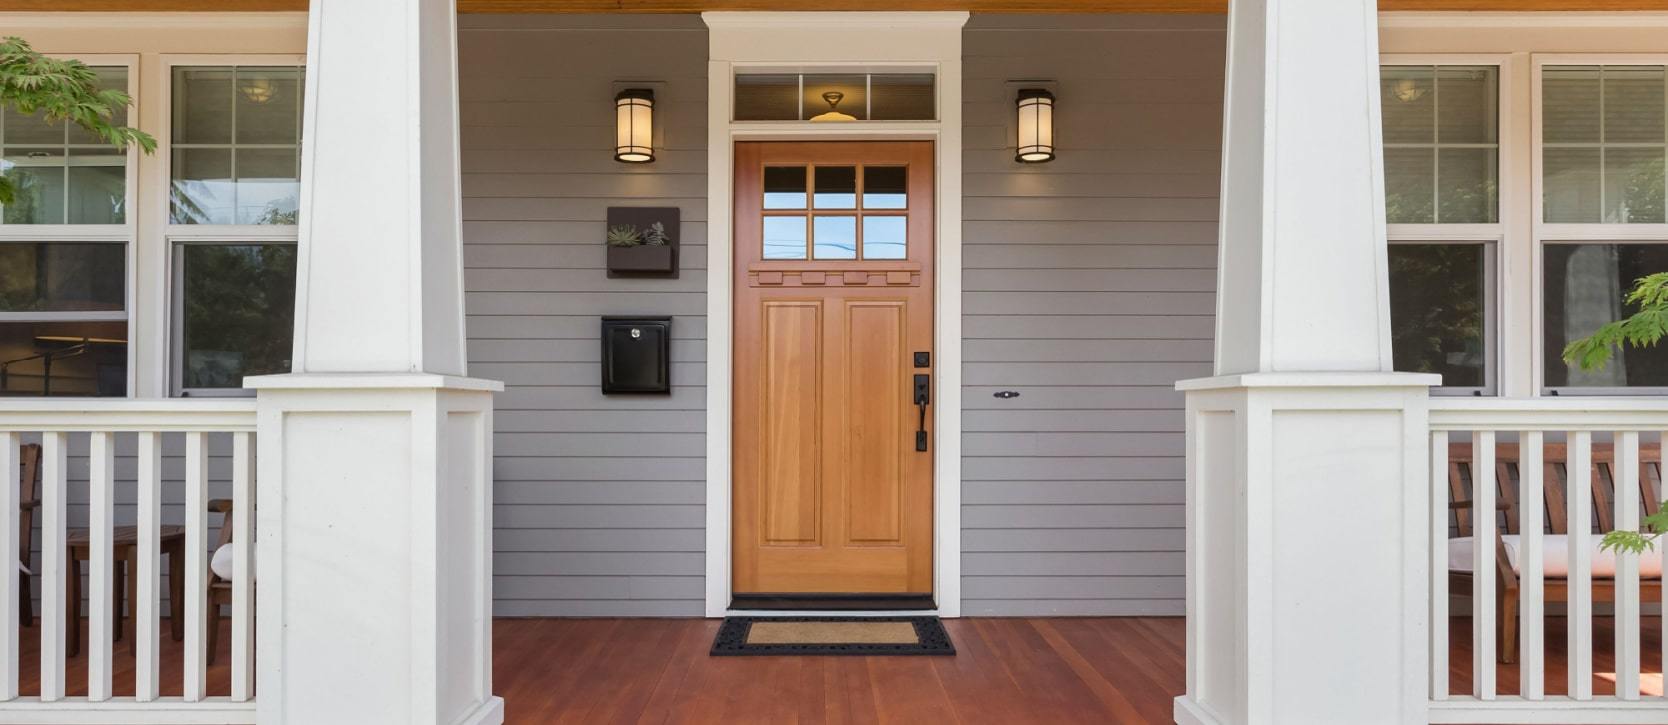 Front door on a front porch of a residential home